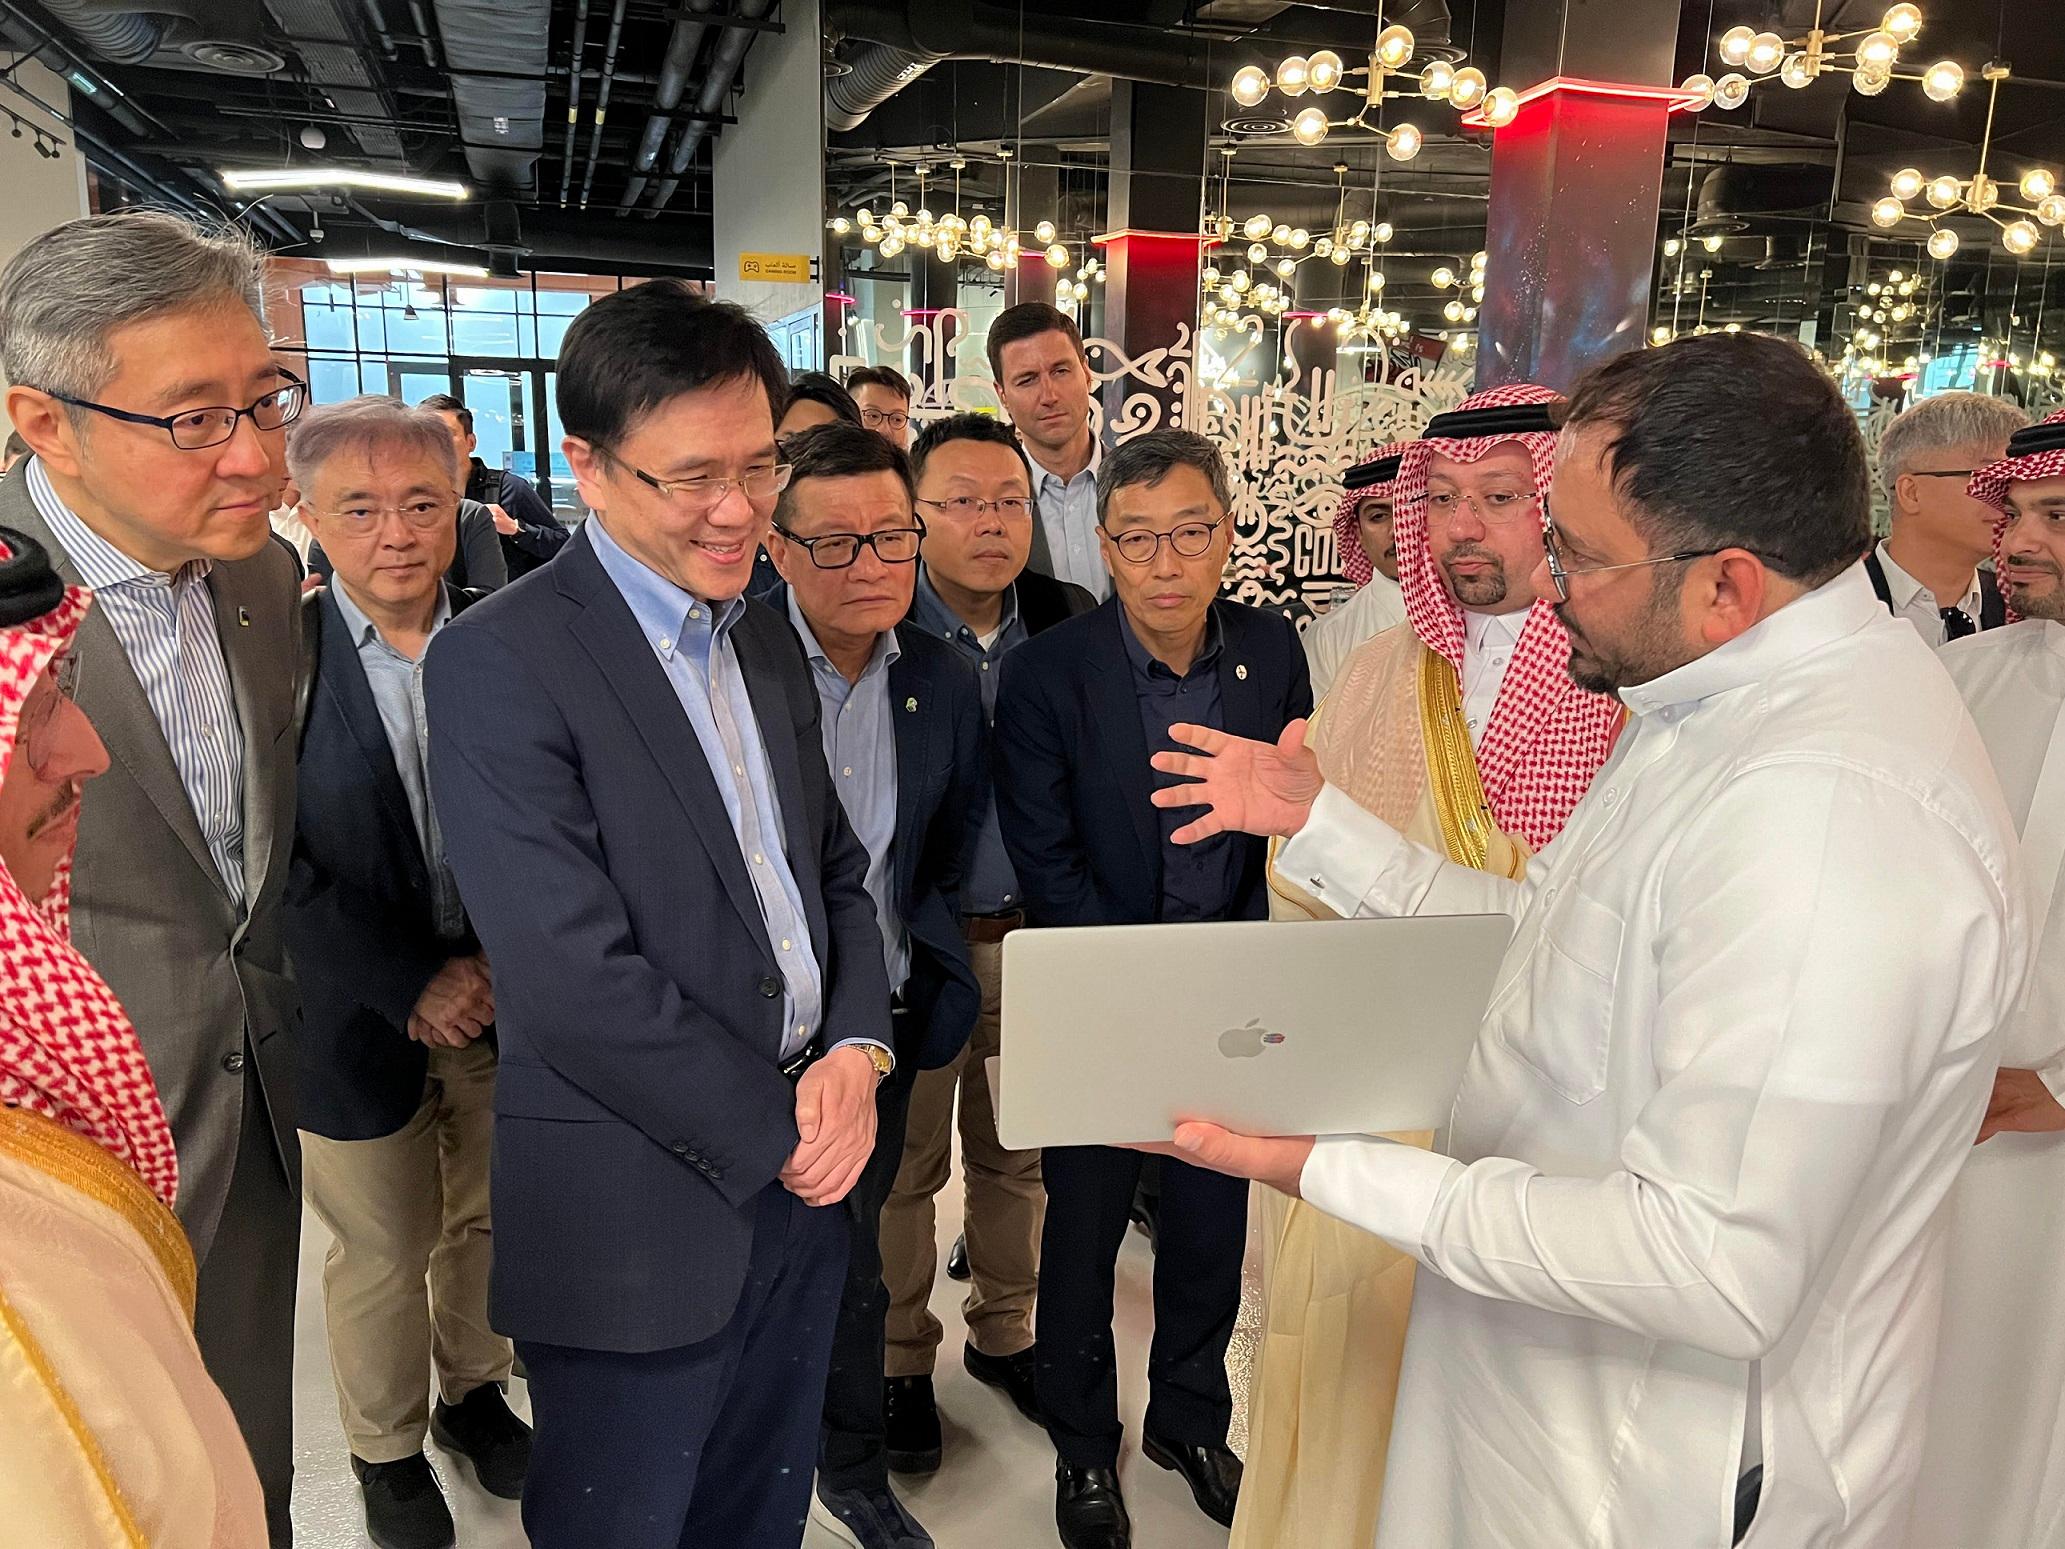 The Secretary for Innovation, Technology and Industry, Professor Sun Dong (third left), toured The Garage in King Abdulaziz City for Science and Technology on March 3 (Riyadh time) and engaged in exchanges with technology enterprises of the accelerator.